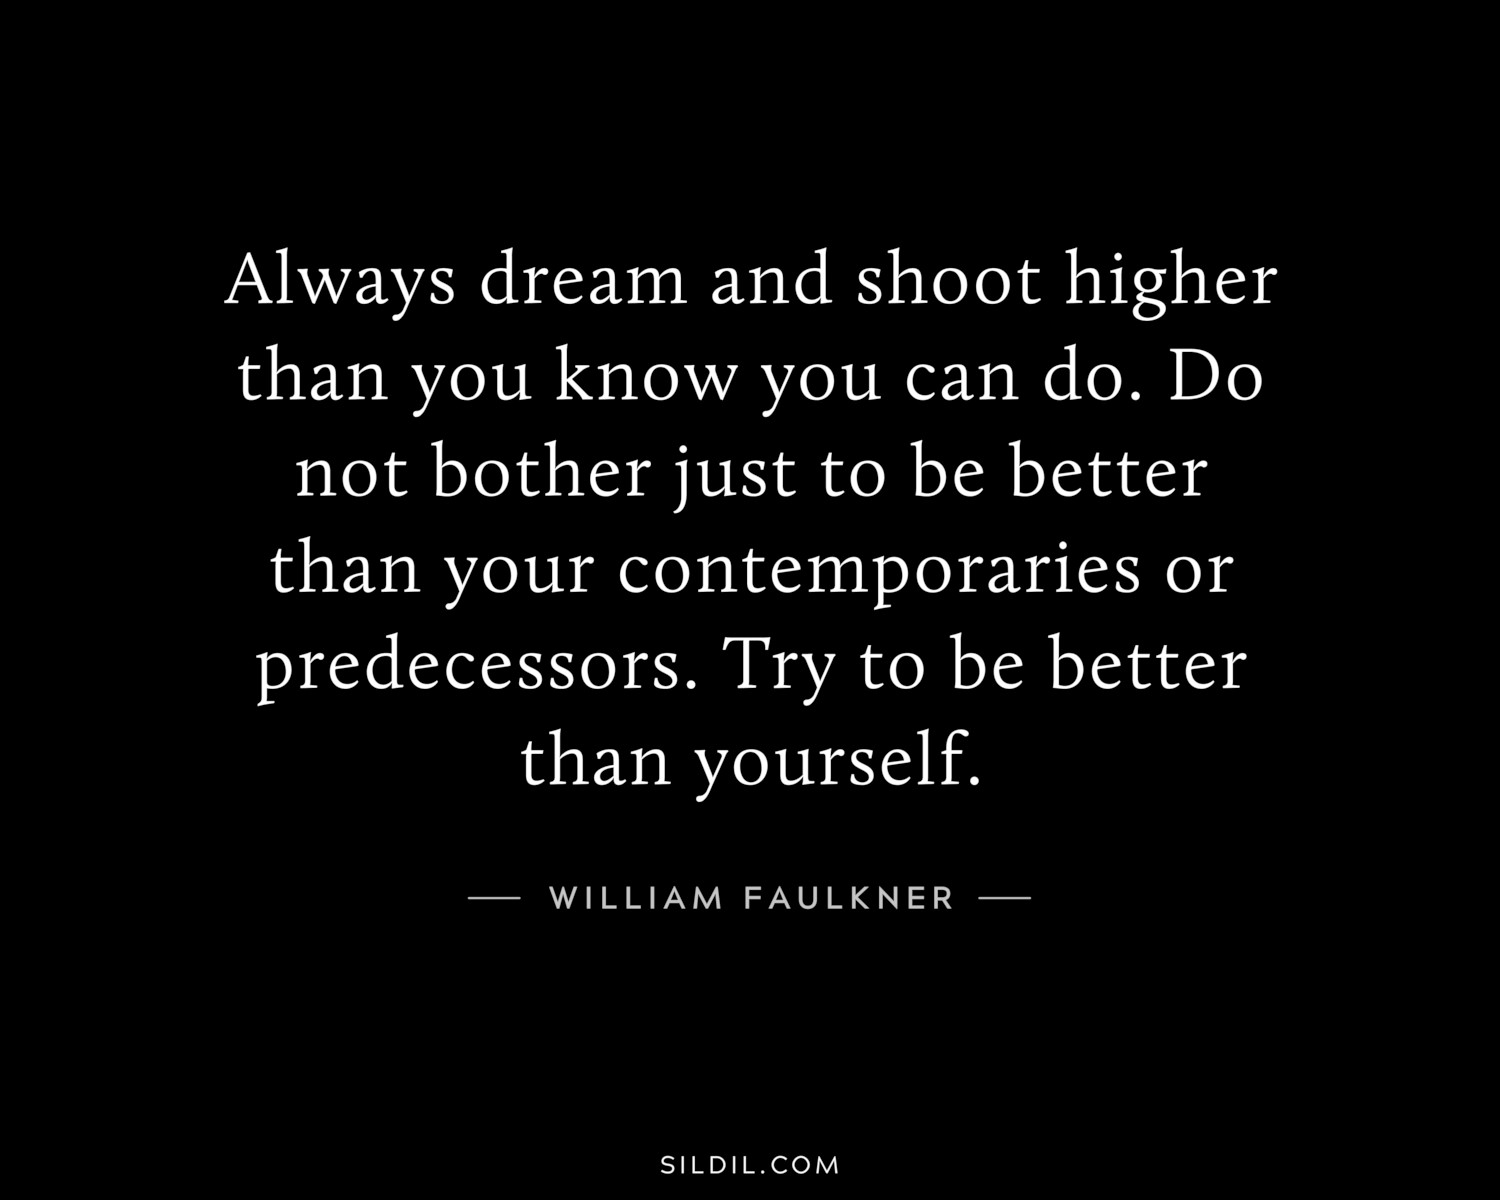 Always dream and shoot higher than you know you can do. Do not bother just to be better than your contemporaries or predecessors. Try to be better than yourself.